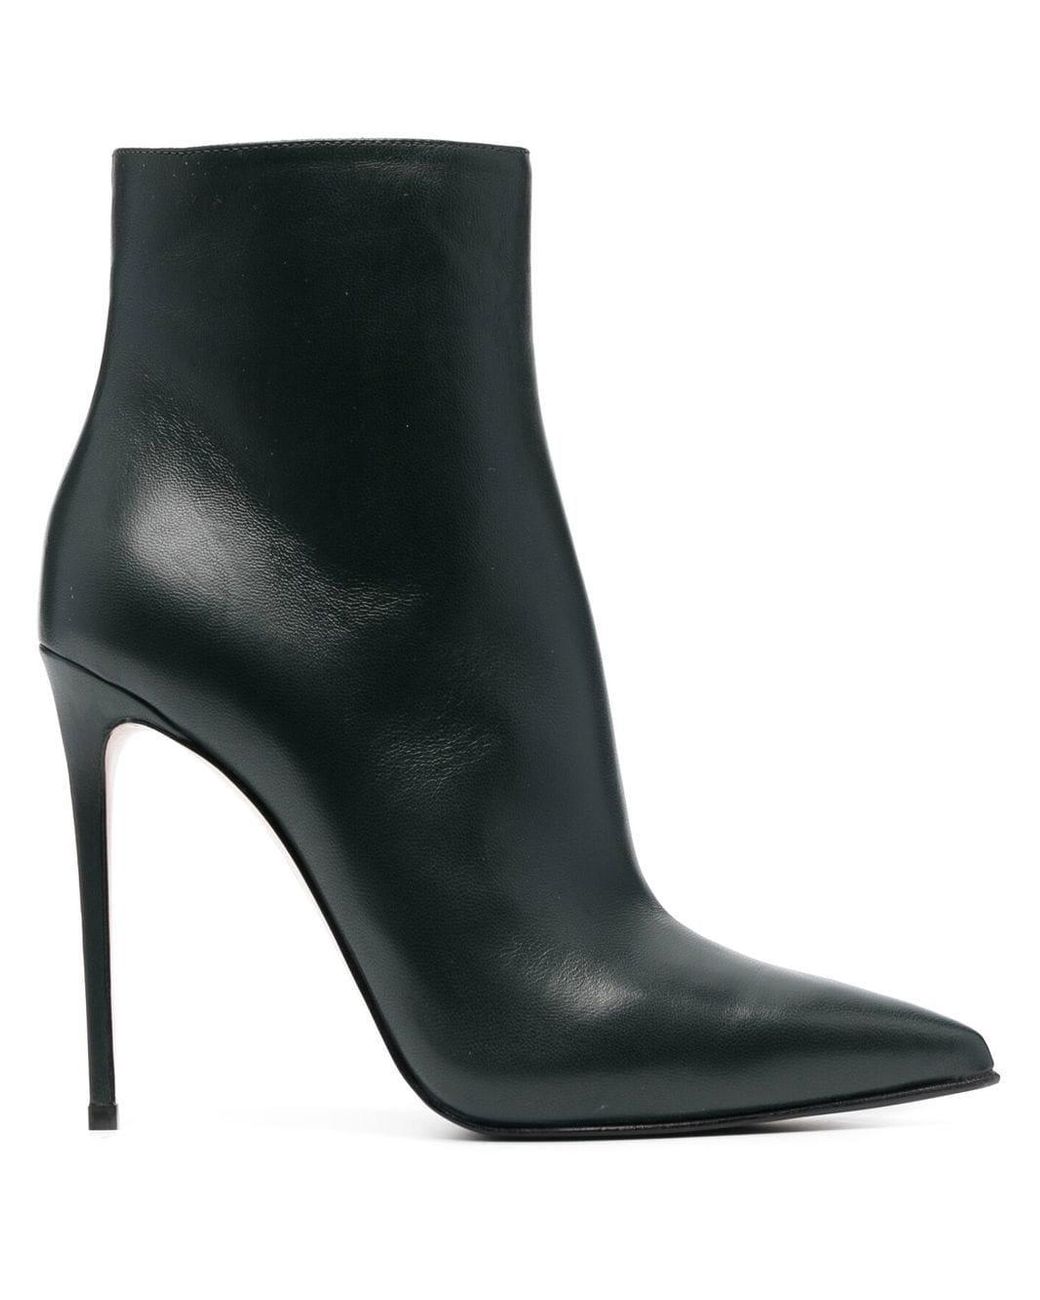 Le Silla Eva Leather Ankle Boots in Green | Lyst